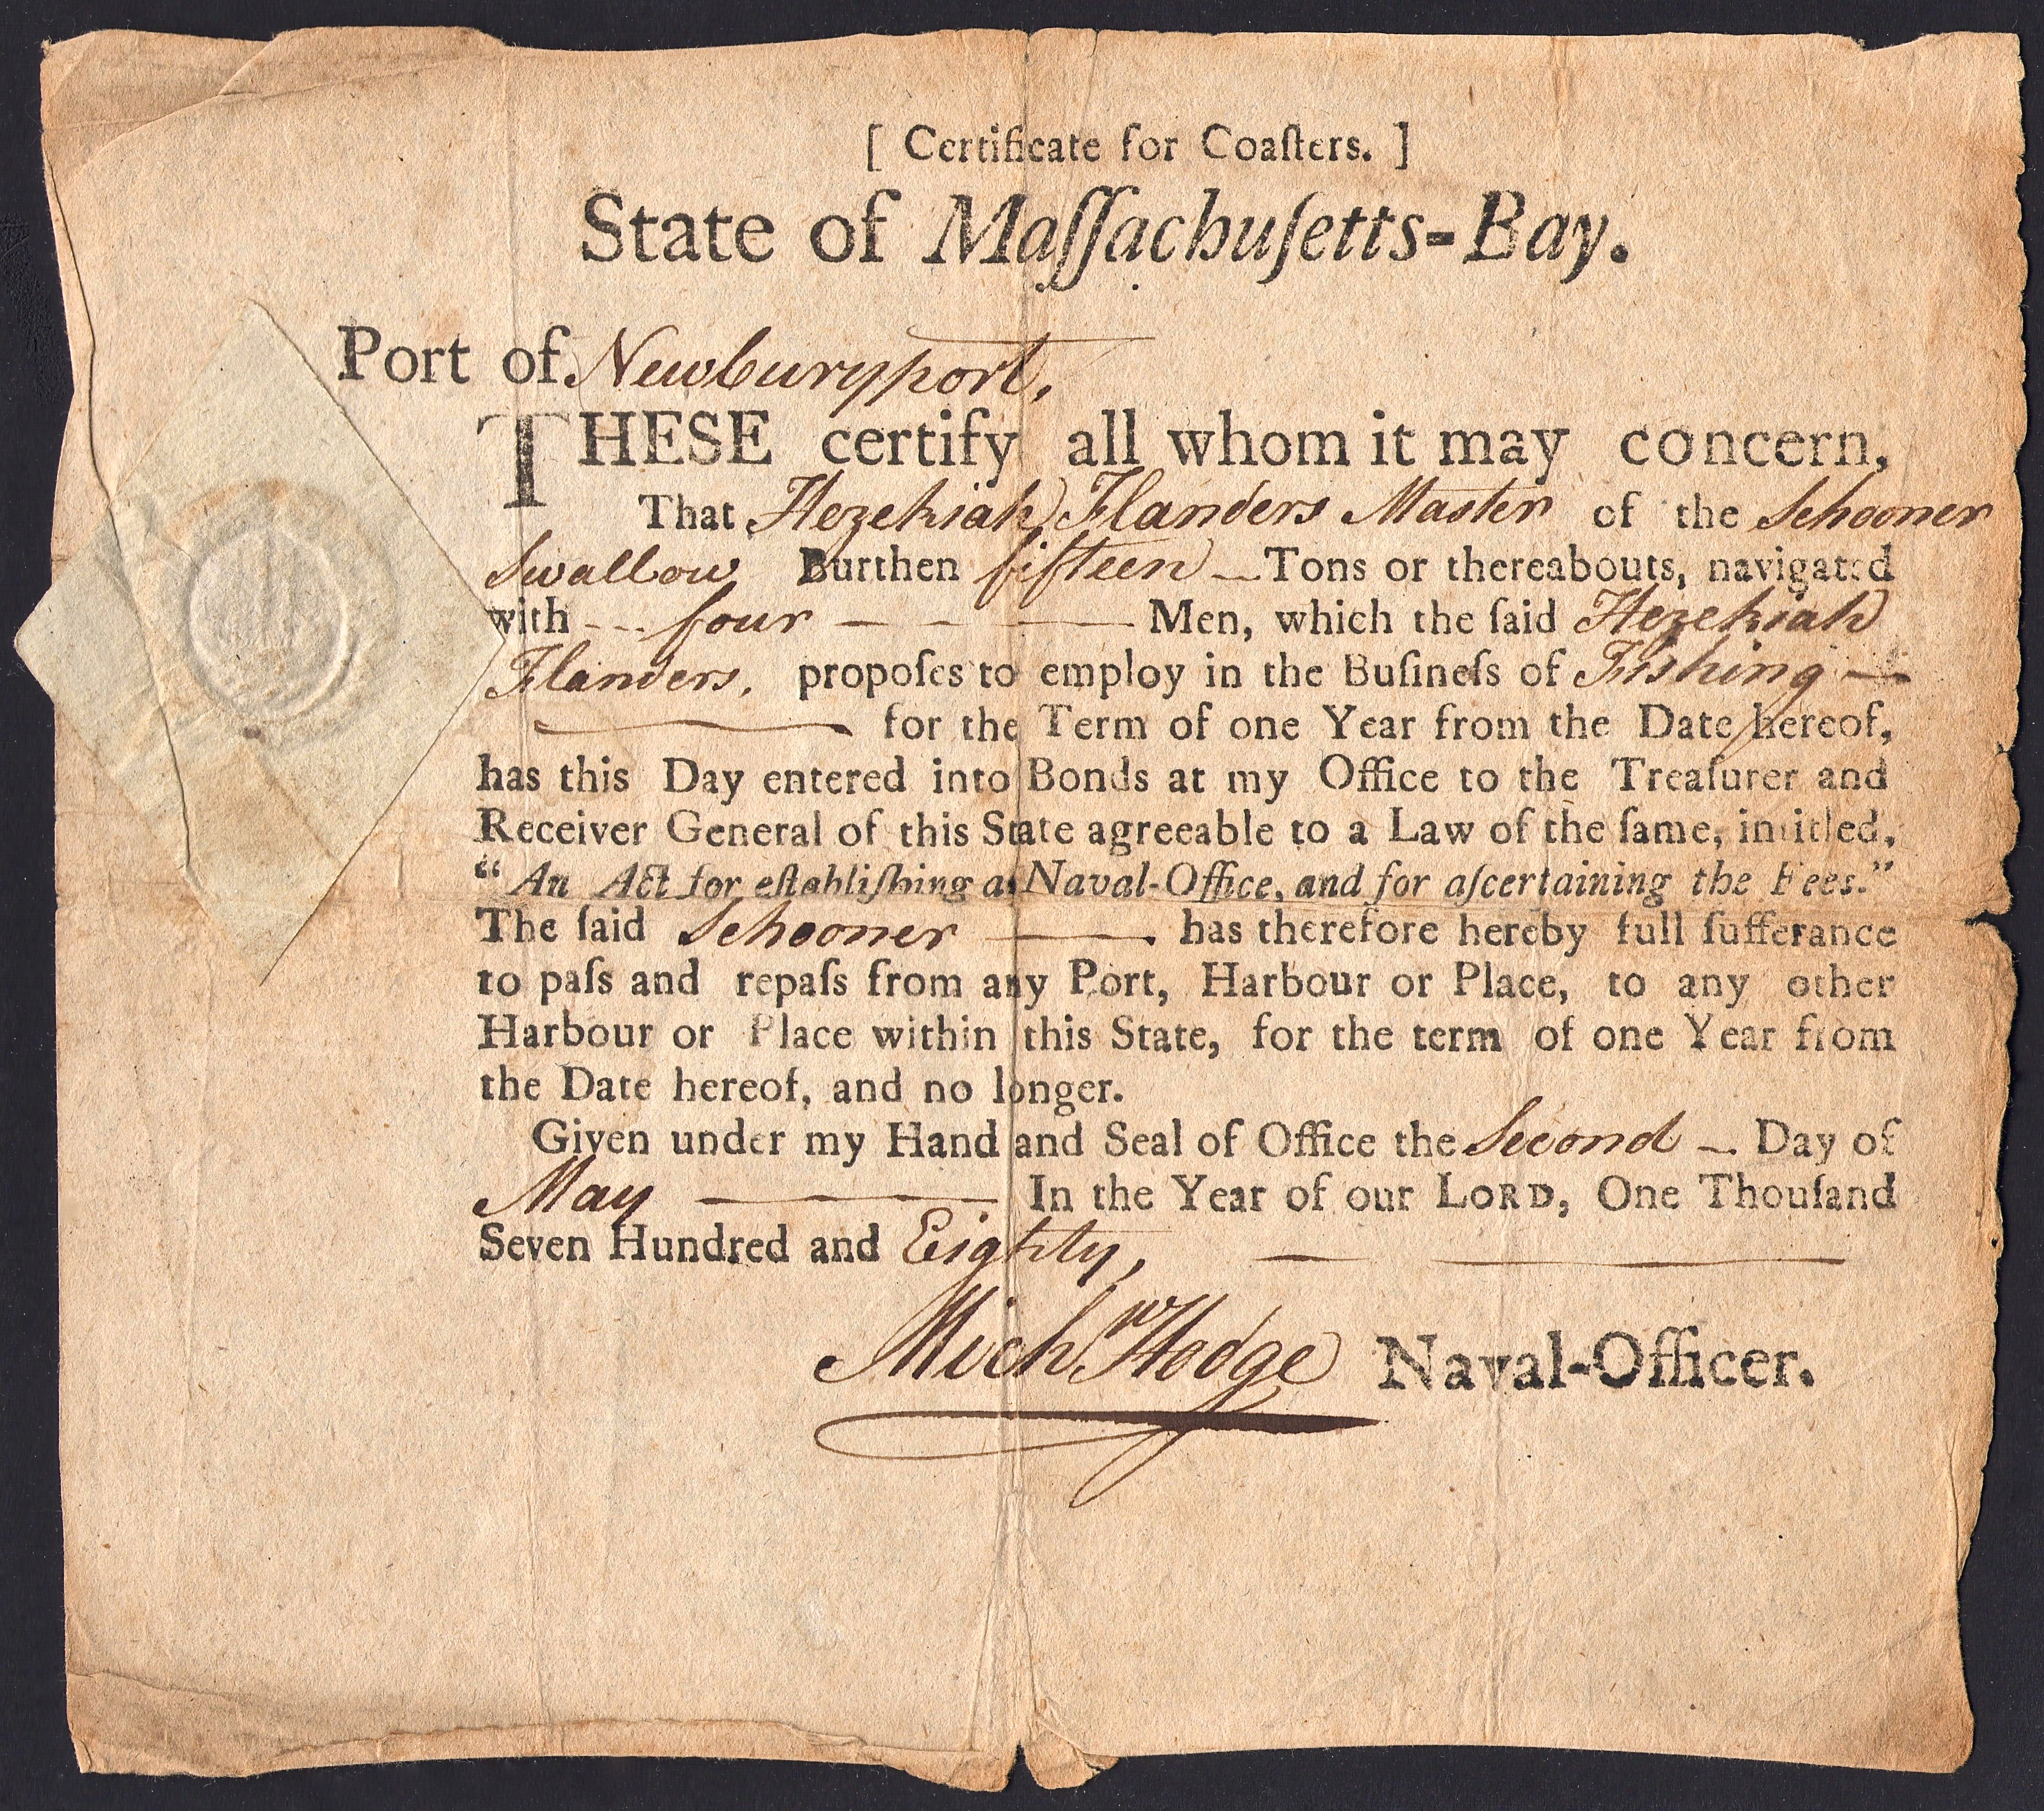 Revolutionary War Fishing License with Embossed Revenue Stamp